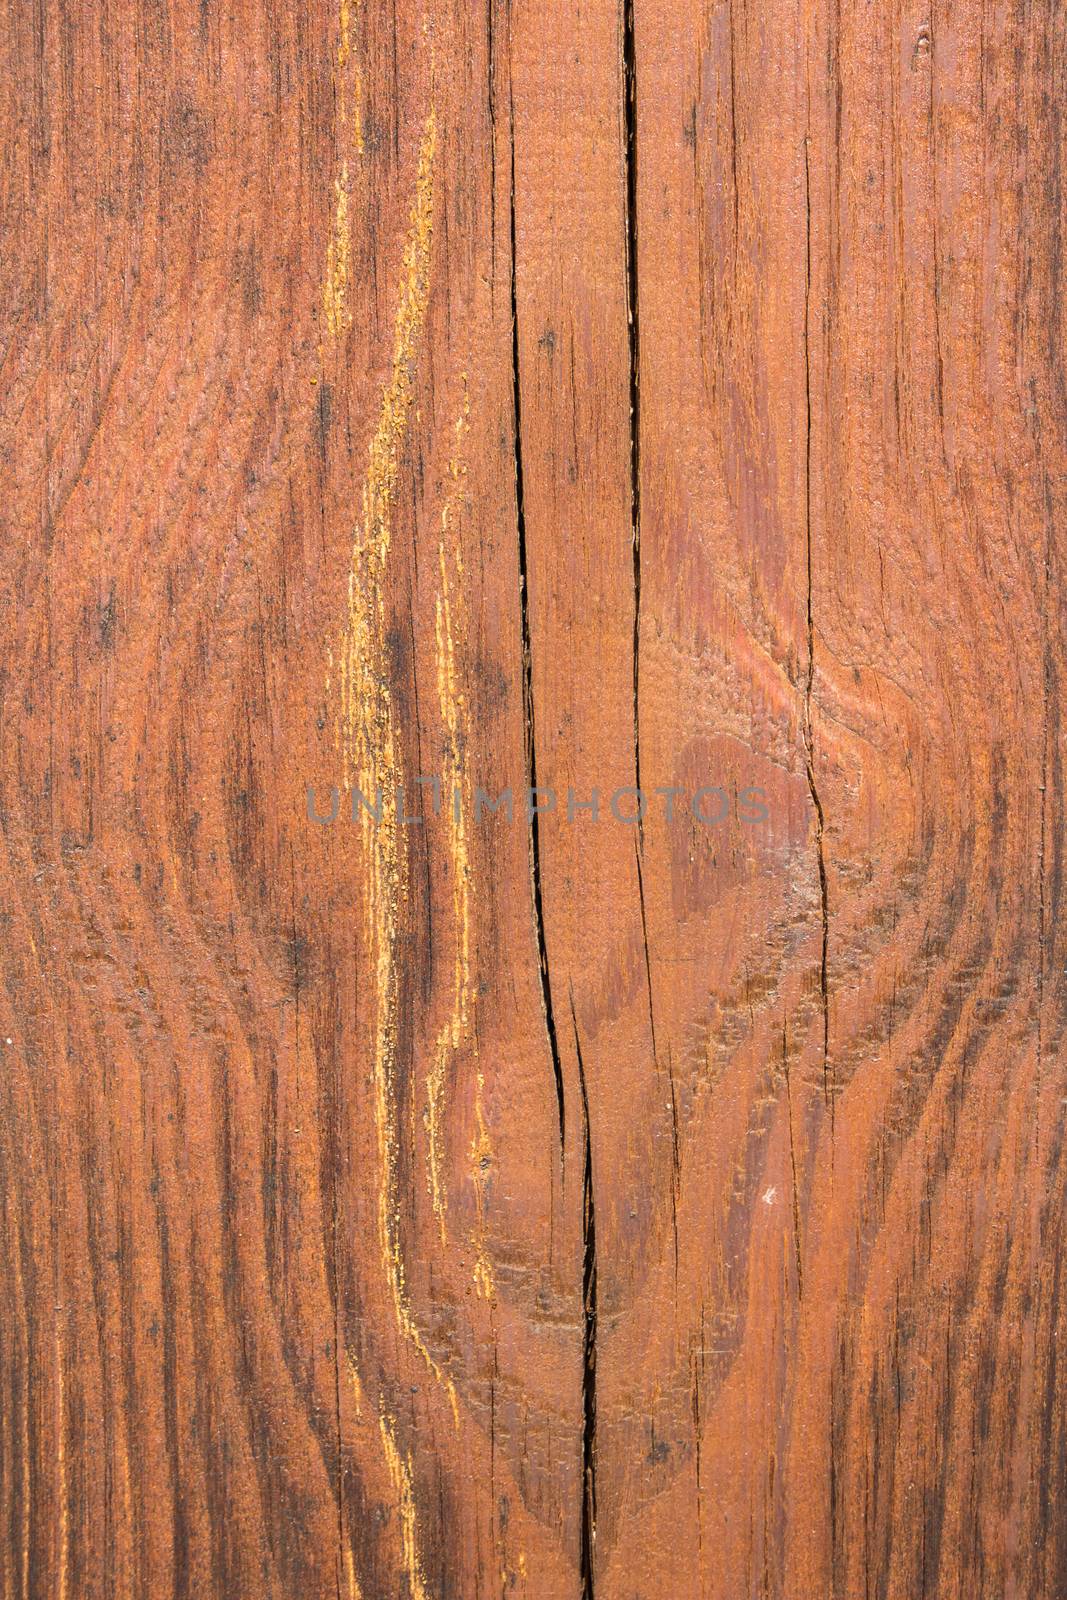 Closeup of wood texture with natural pattern.